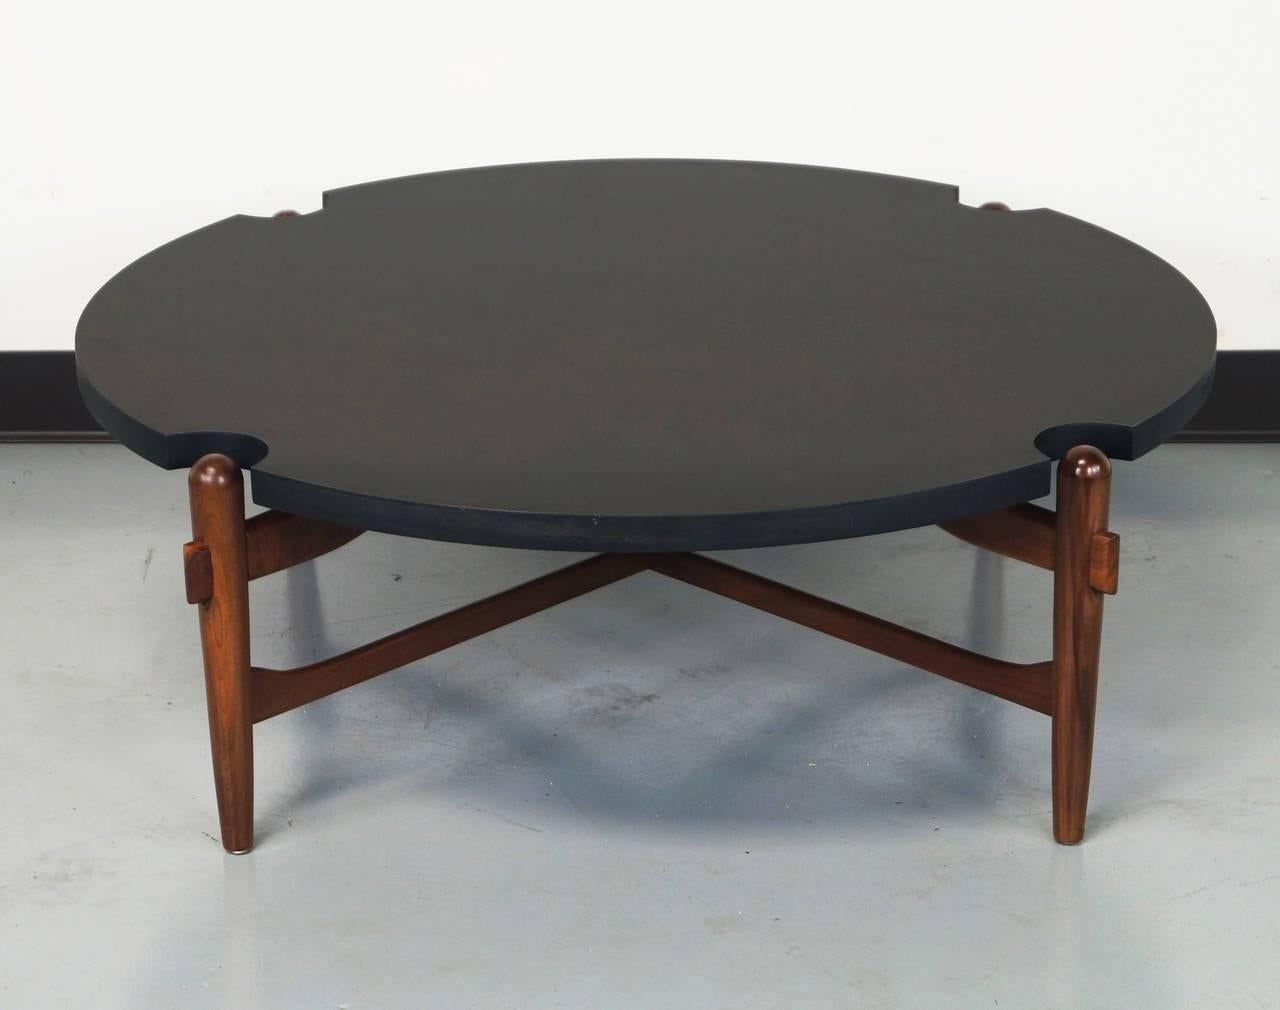 Vintage walnut coffee table features a round black laminate top with sculptural wood frame with cross-stretchers, original finish. This piece is attributed to Greta M. Grossman.